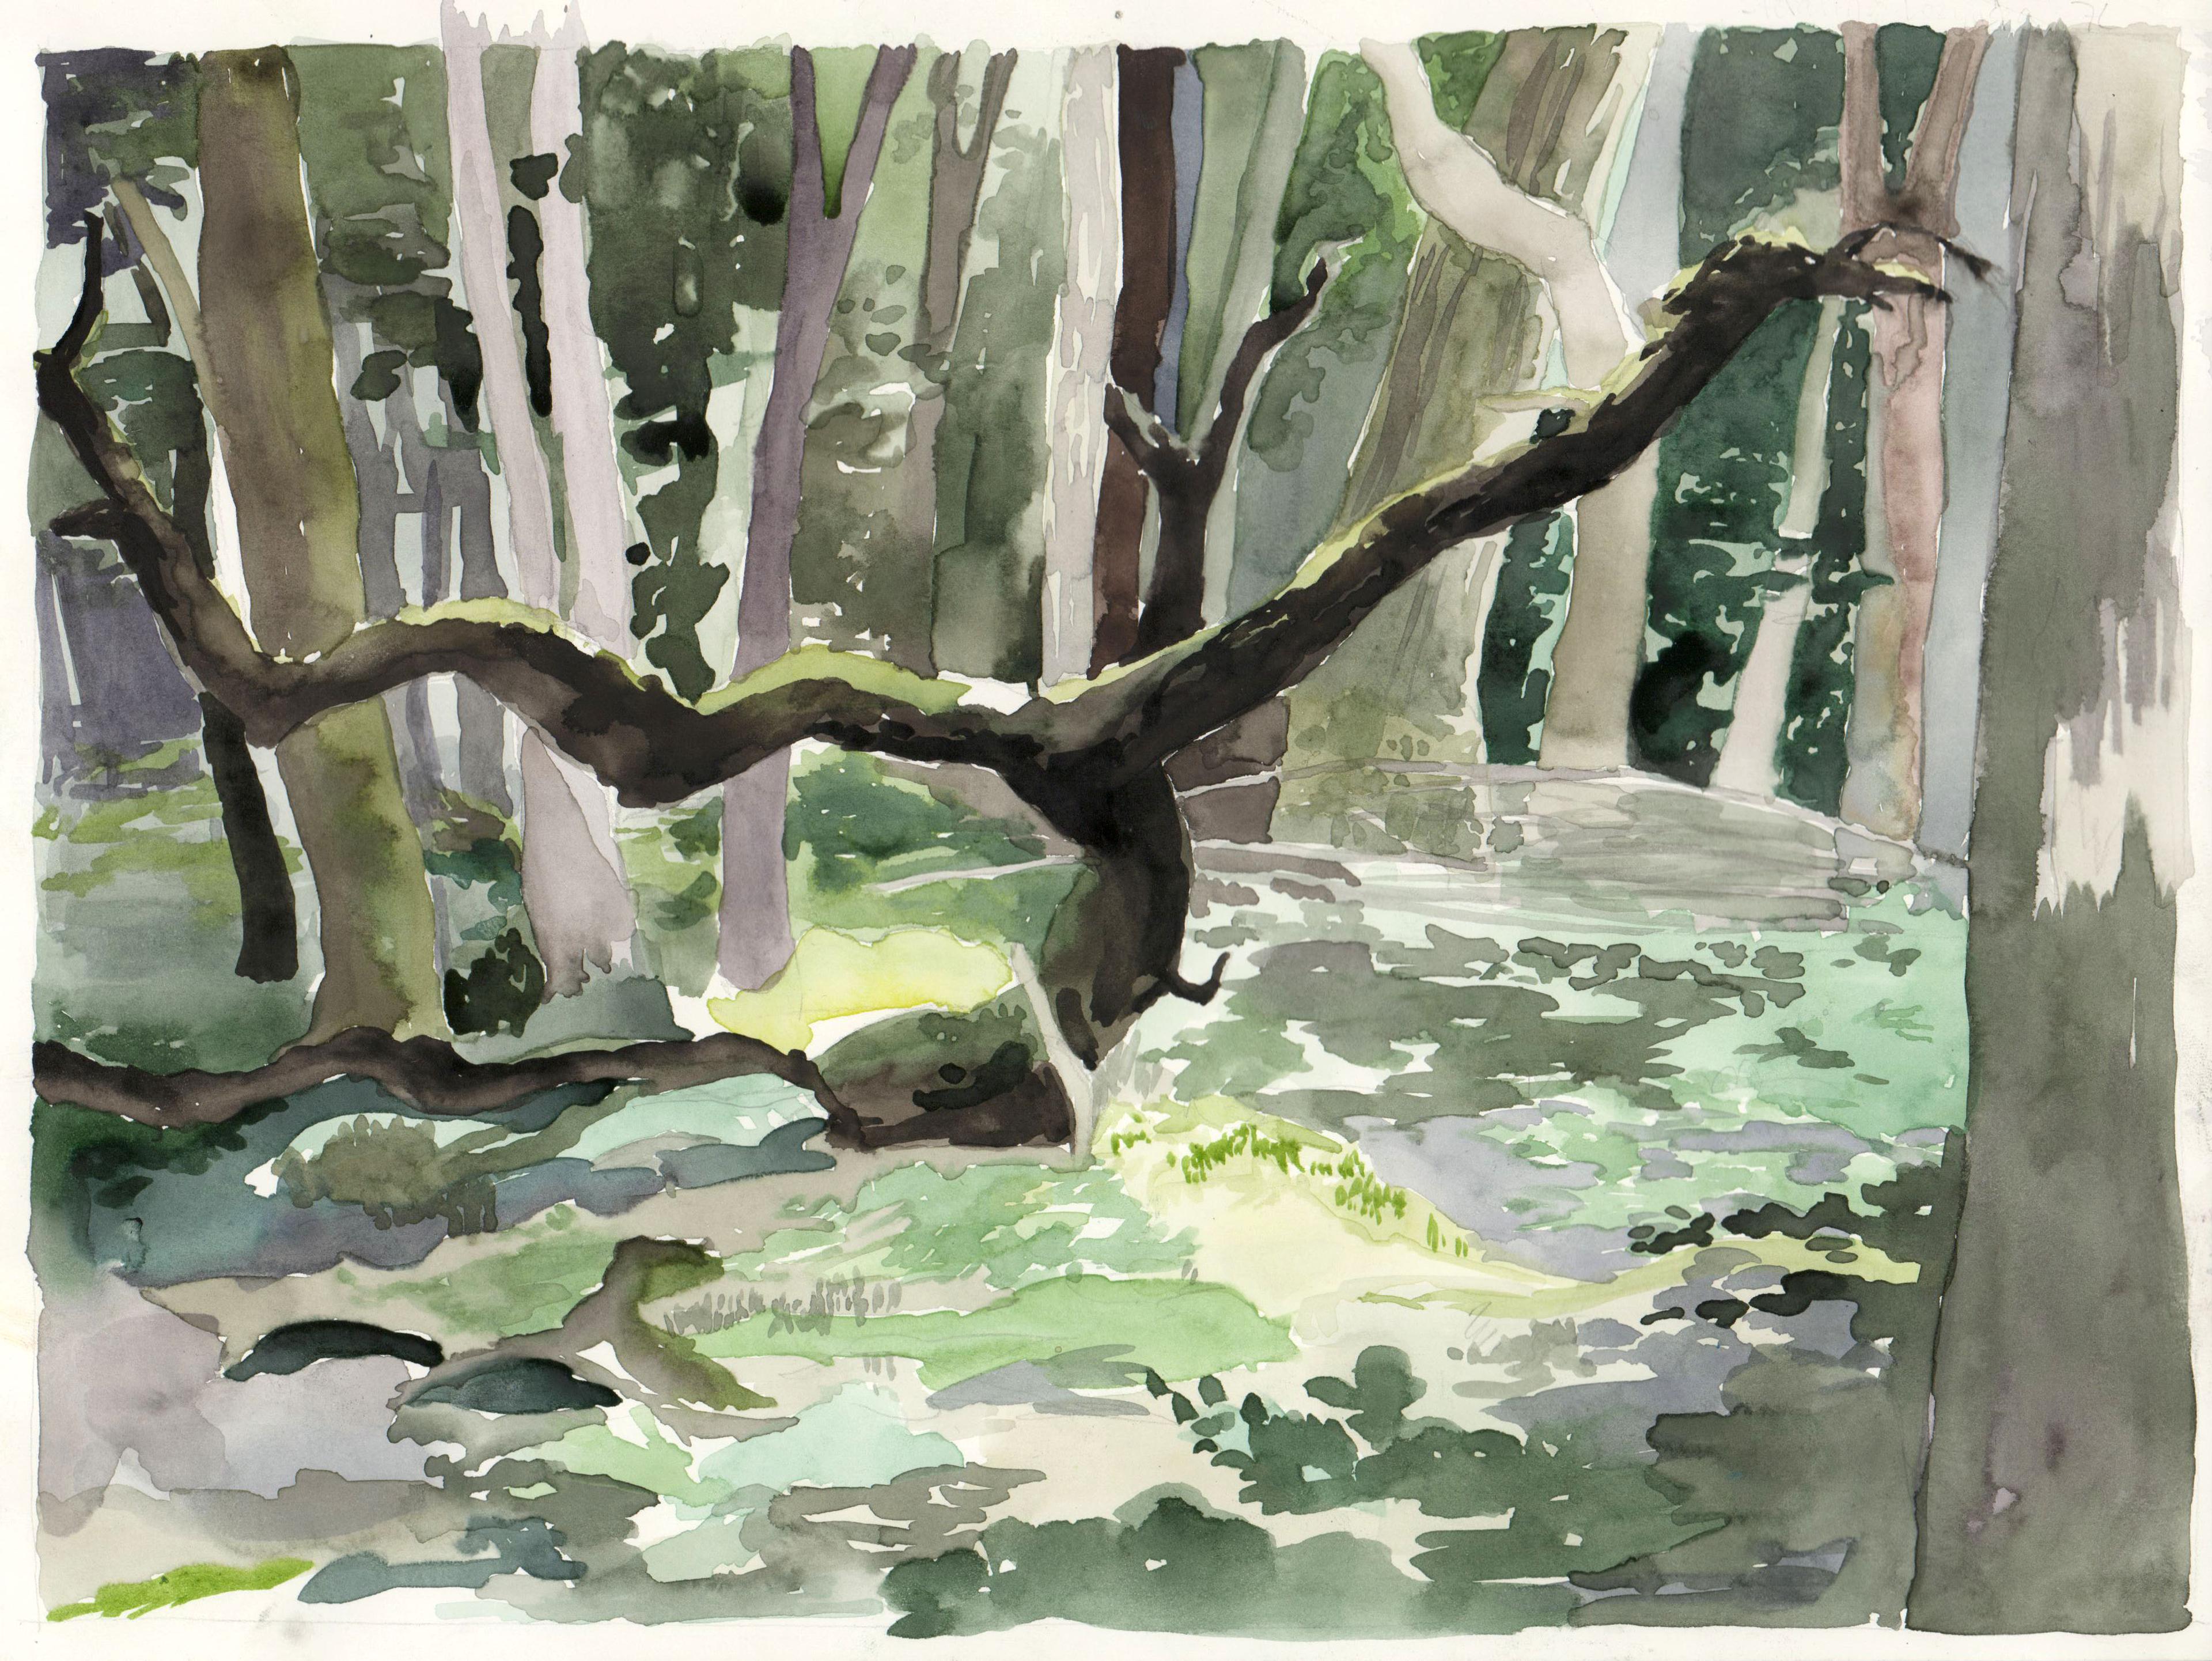 Watercolor painting of a pair of widely separated brown tree branches rising to the left and right from a trunk in the center of a forest clearing. The tree is surrounded by a canopy of white tree trunks with green foliage in the background.